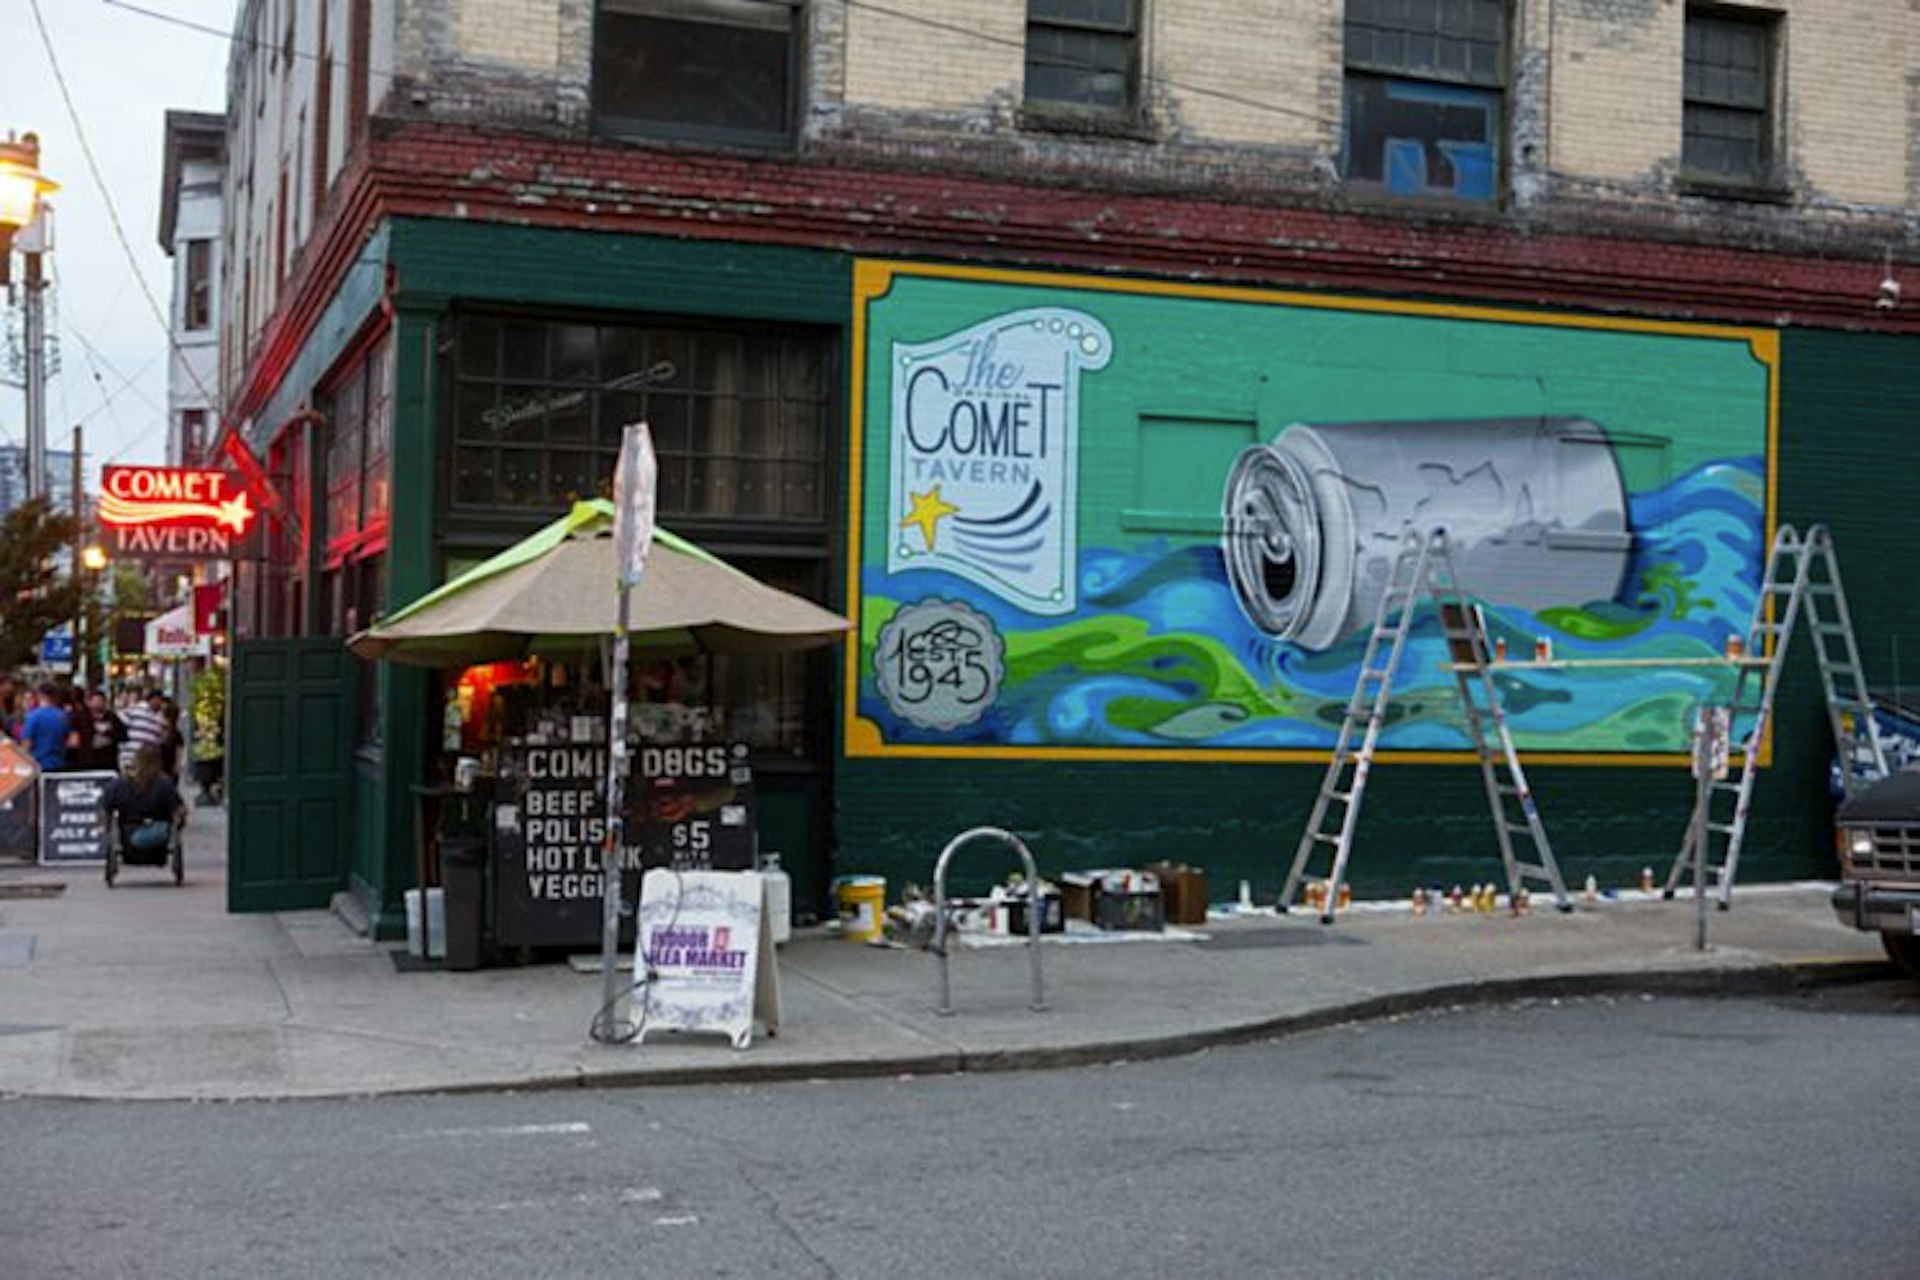 A mural on the outside wall of Seattle's now-iconic Comet Tavern. Image by J / CC BY-SA 2.0